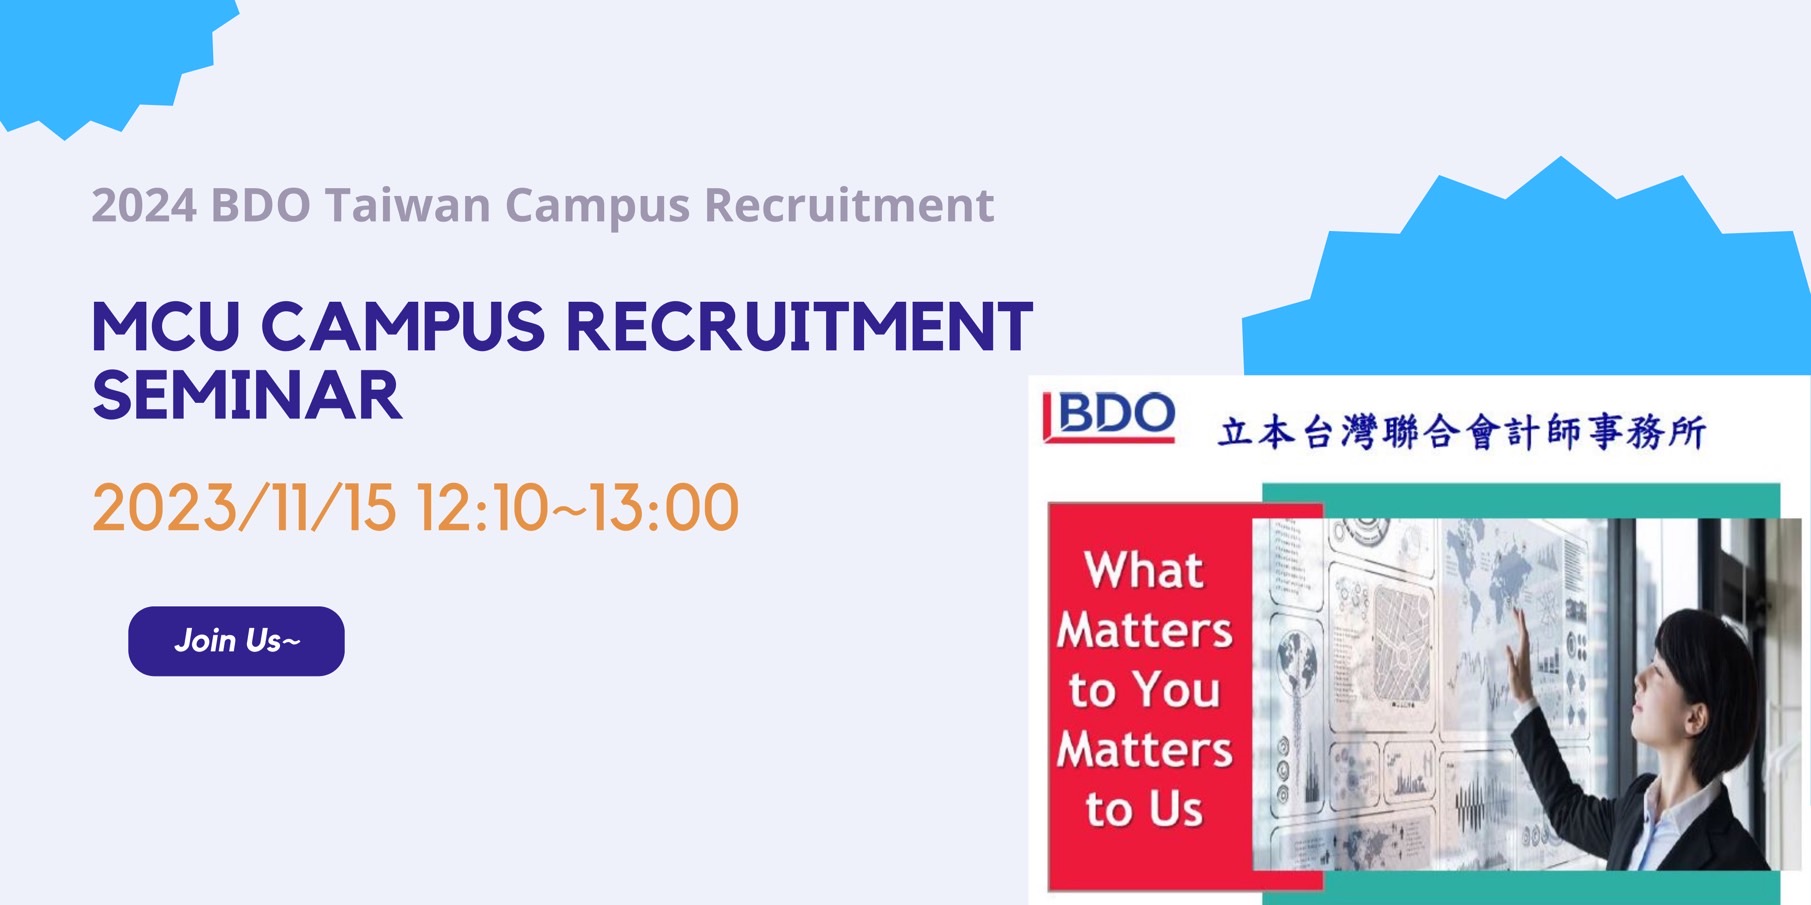 Featured image for “Information for BDO Taiwan Campus Recruitment and Recruitment Seminar for Department of Accounting, MCU”